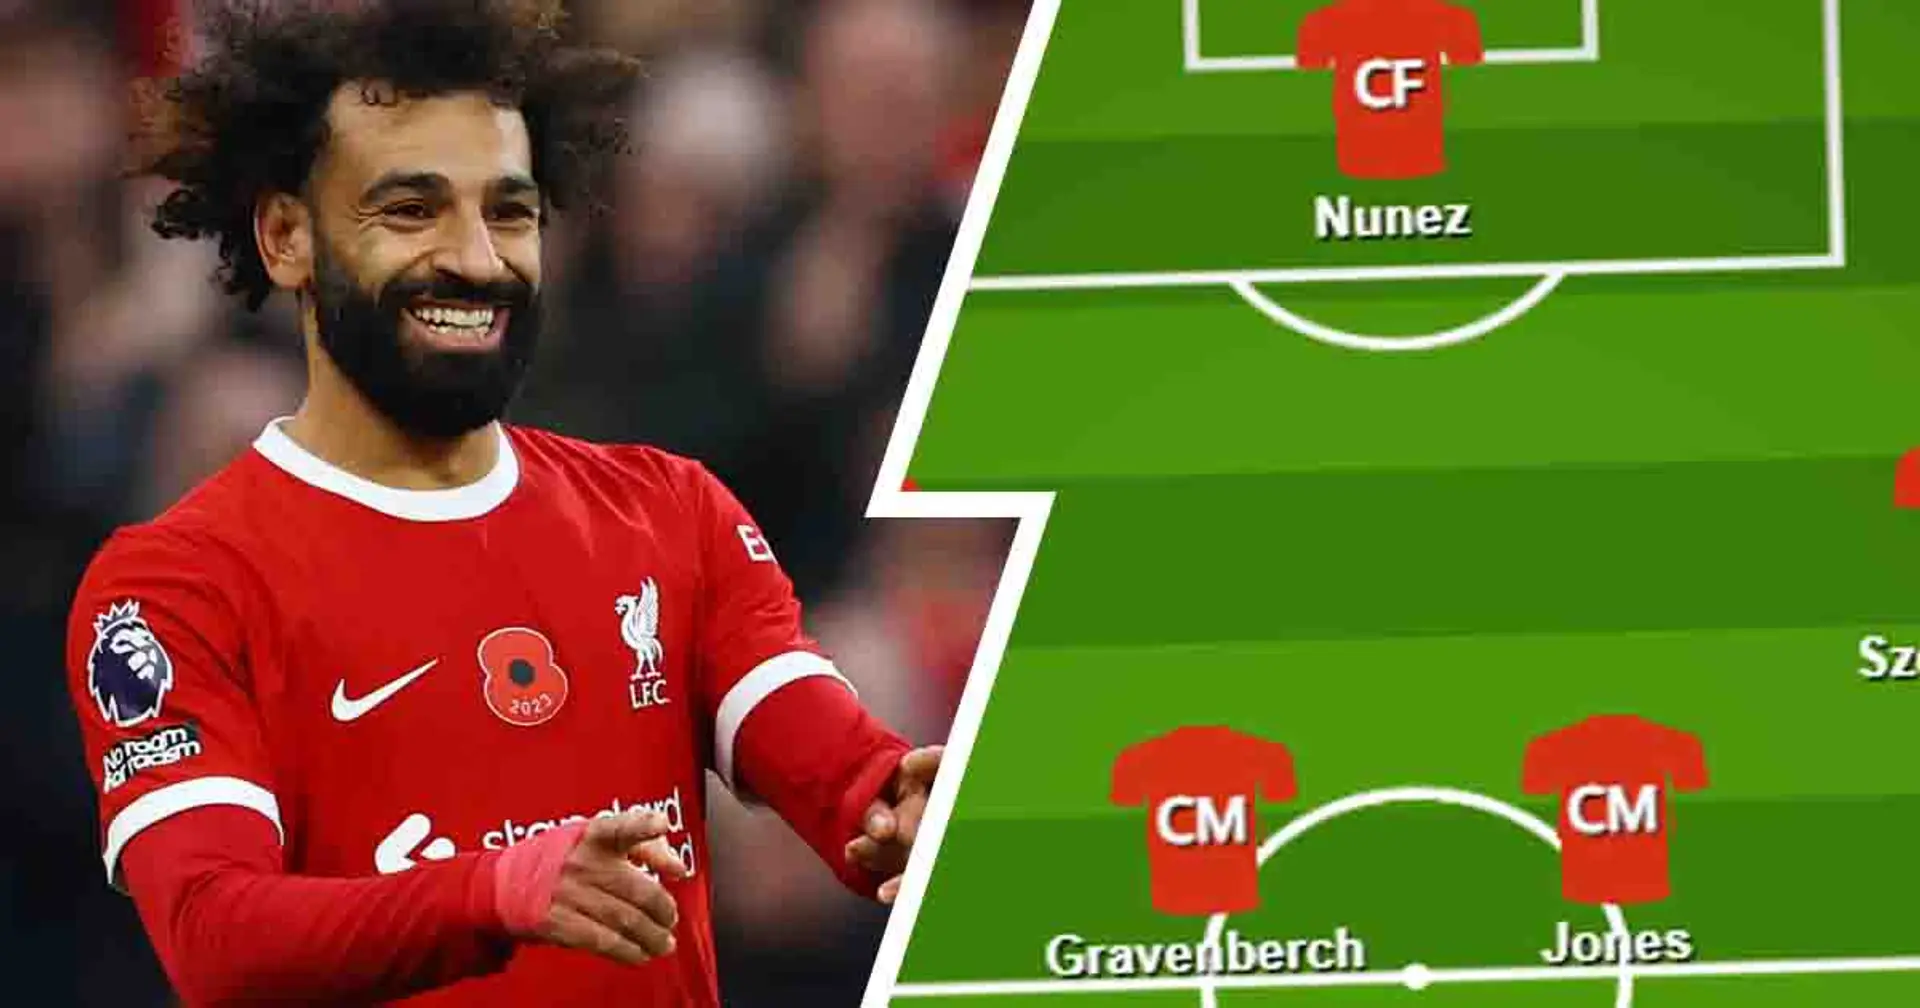 Liverpool fan suggests interesting player to play in Salah’s position during AFCON absence - we show it in lineup